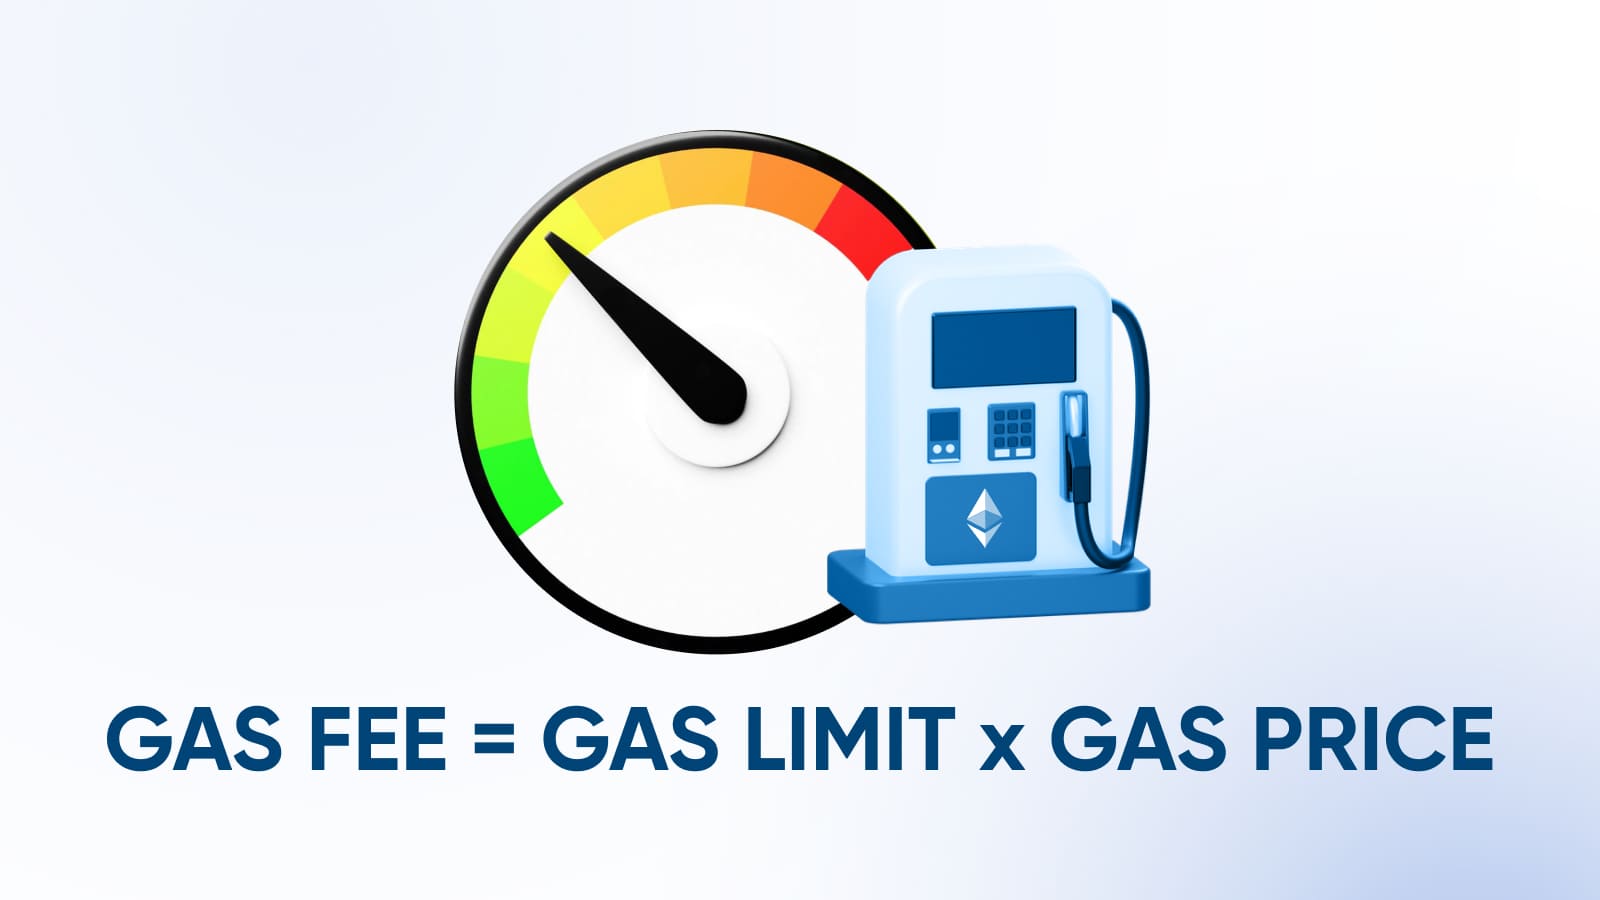 The product of the gas limit by its price is the total cost of the operation.